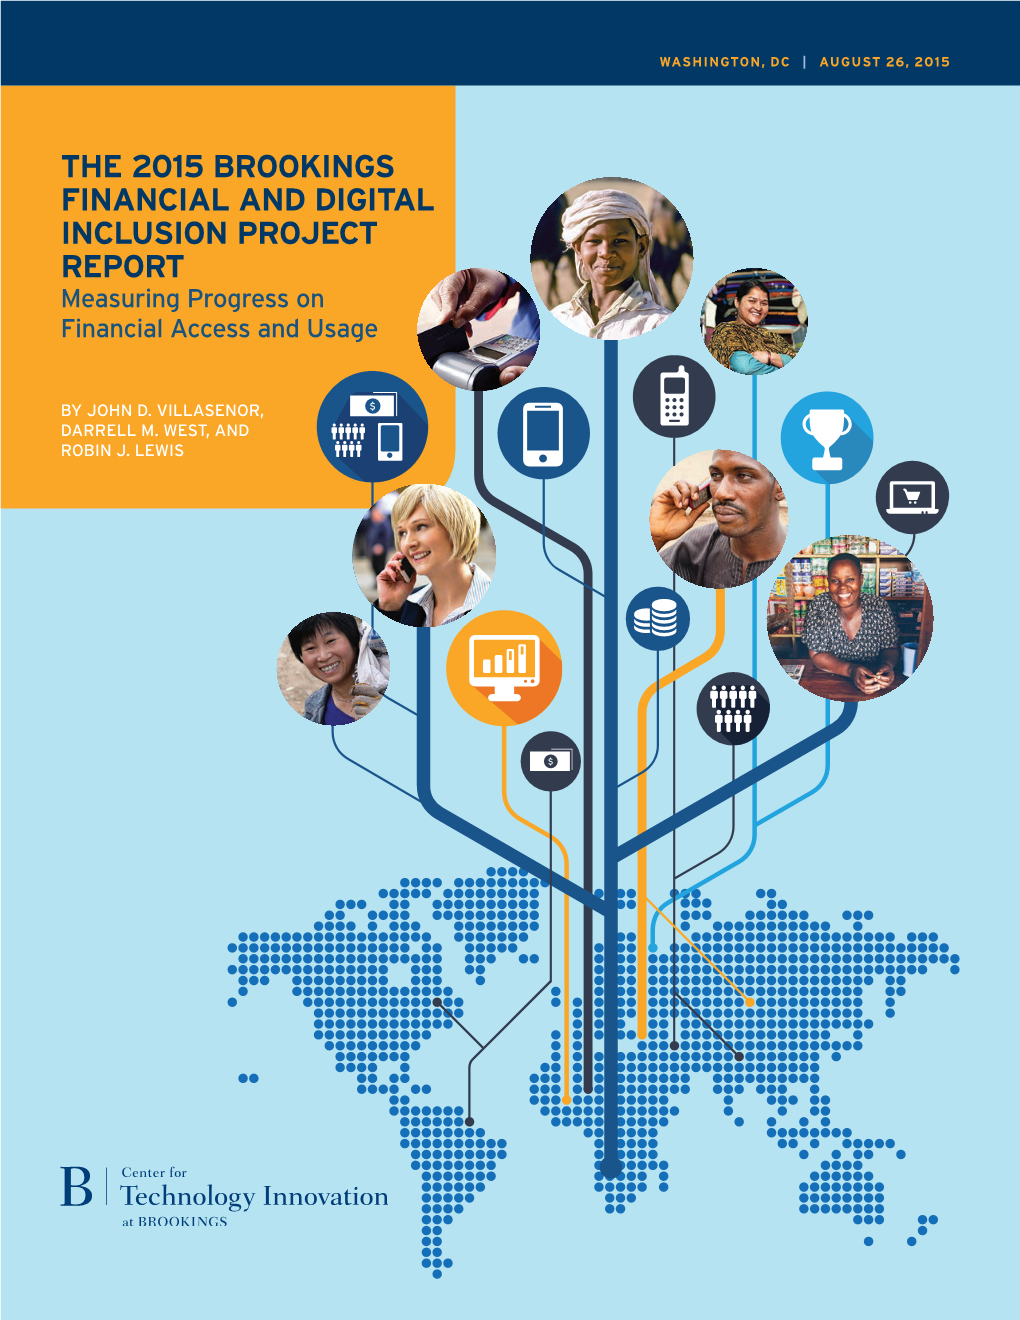 2015 BROOKINGS FINANCIAL and DIGITAL INCLUSION PROJECT REPORT Measuring Progress on Financial Access and Usage